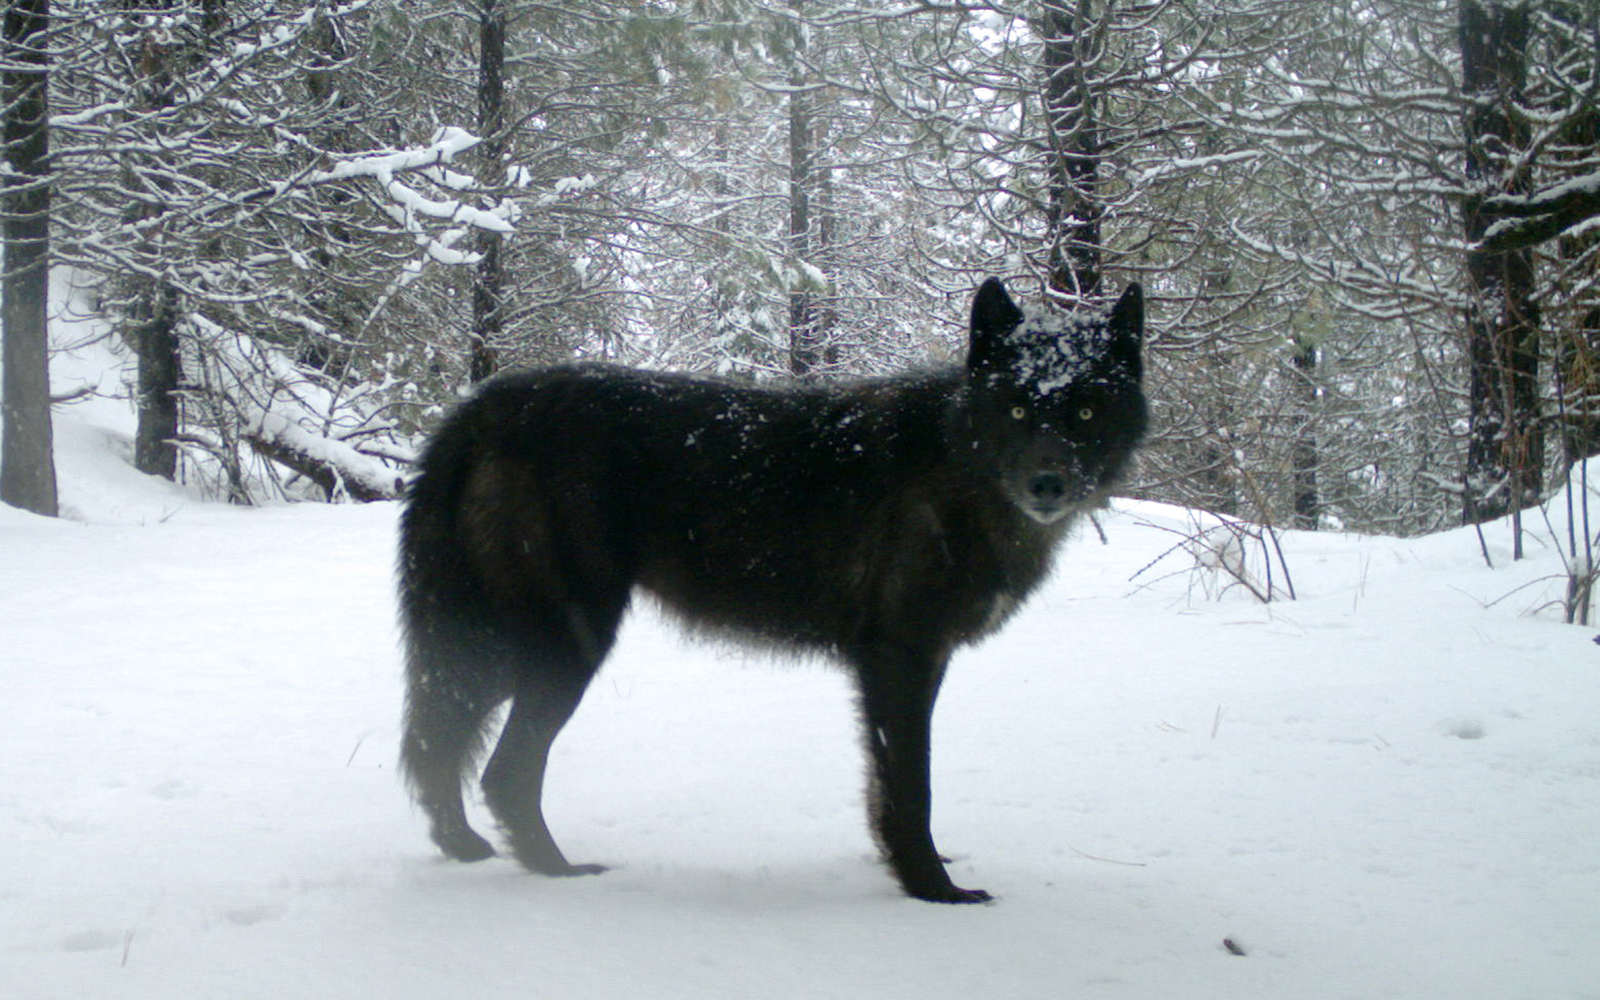 Press Release: Groups Offer Reward for Another Recent Illegal Wolf Killing